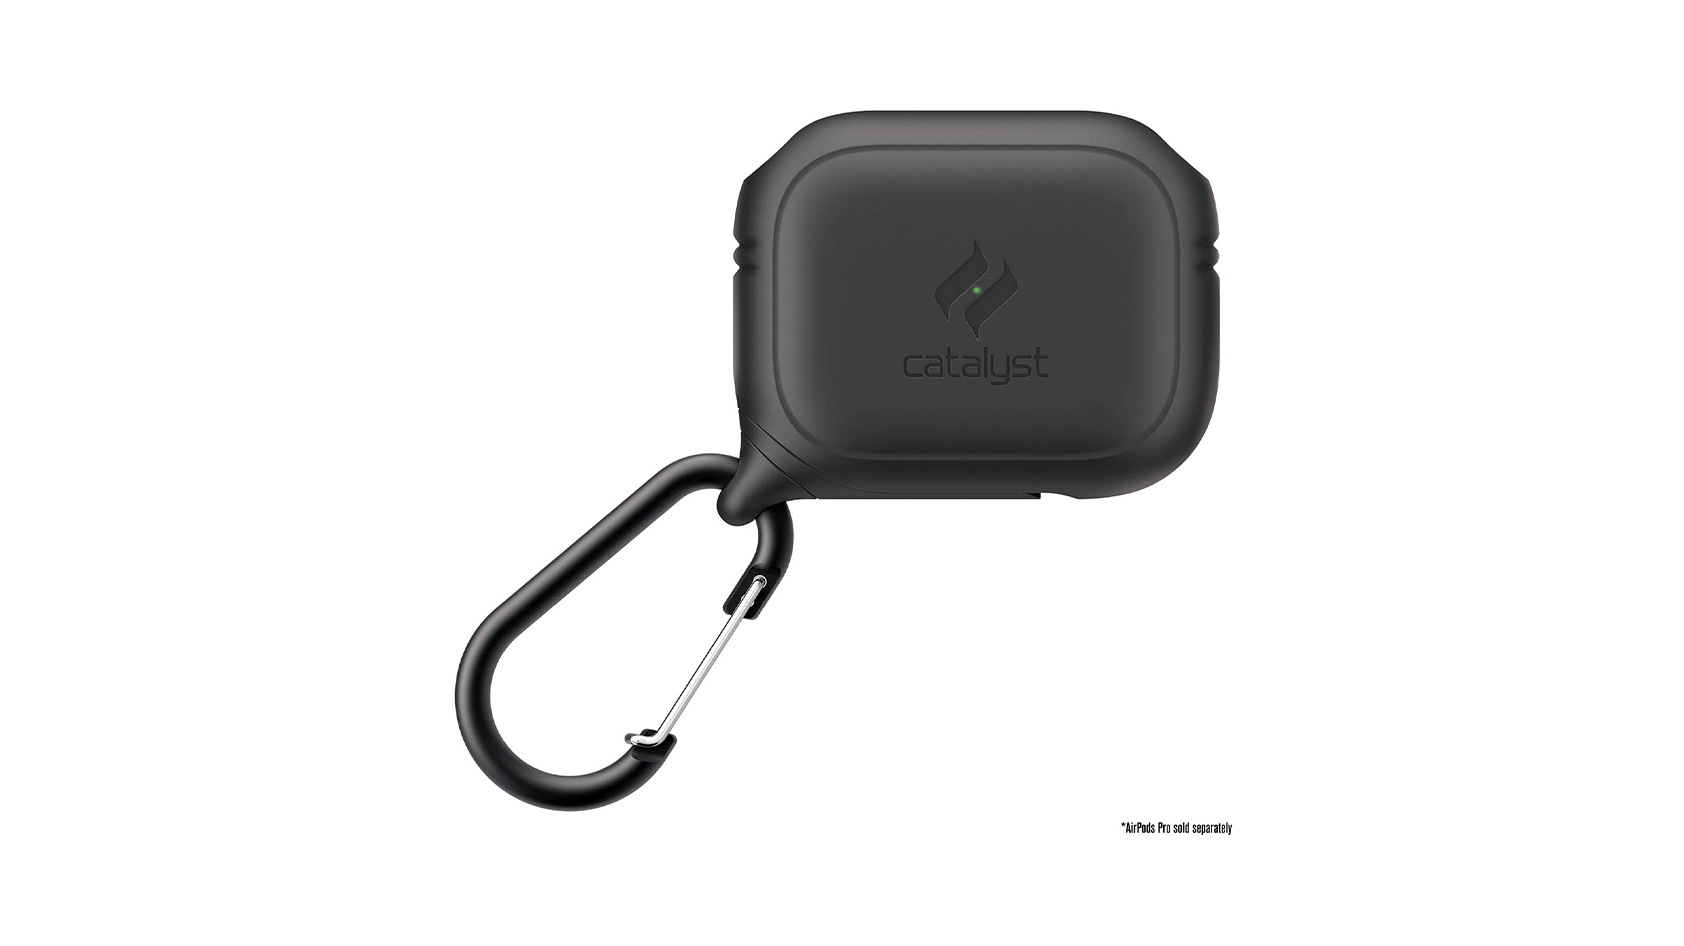 A product image of the Catalyst waterproof Case for AirPods Pro in black with a carabiner.